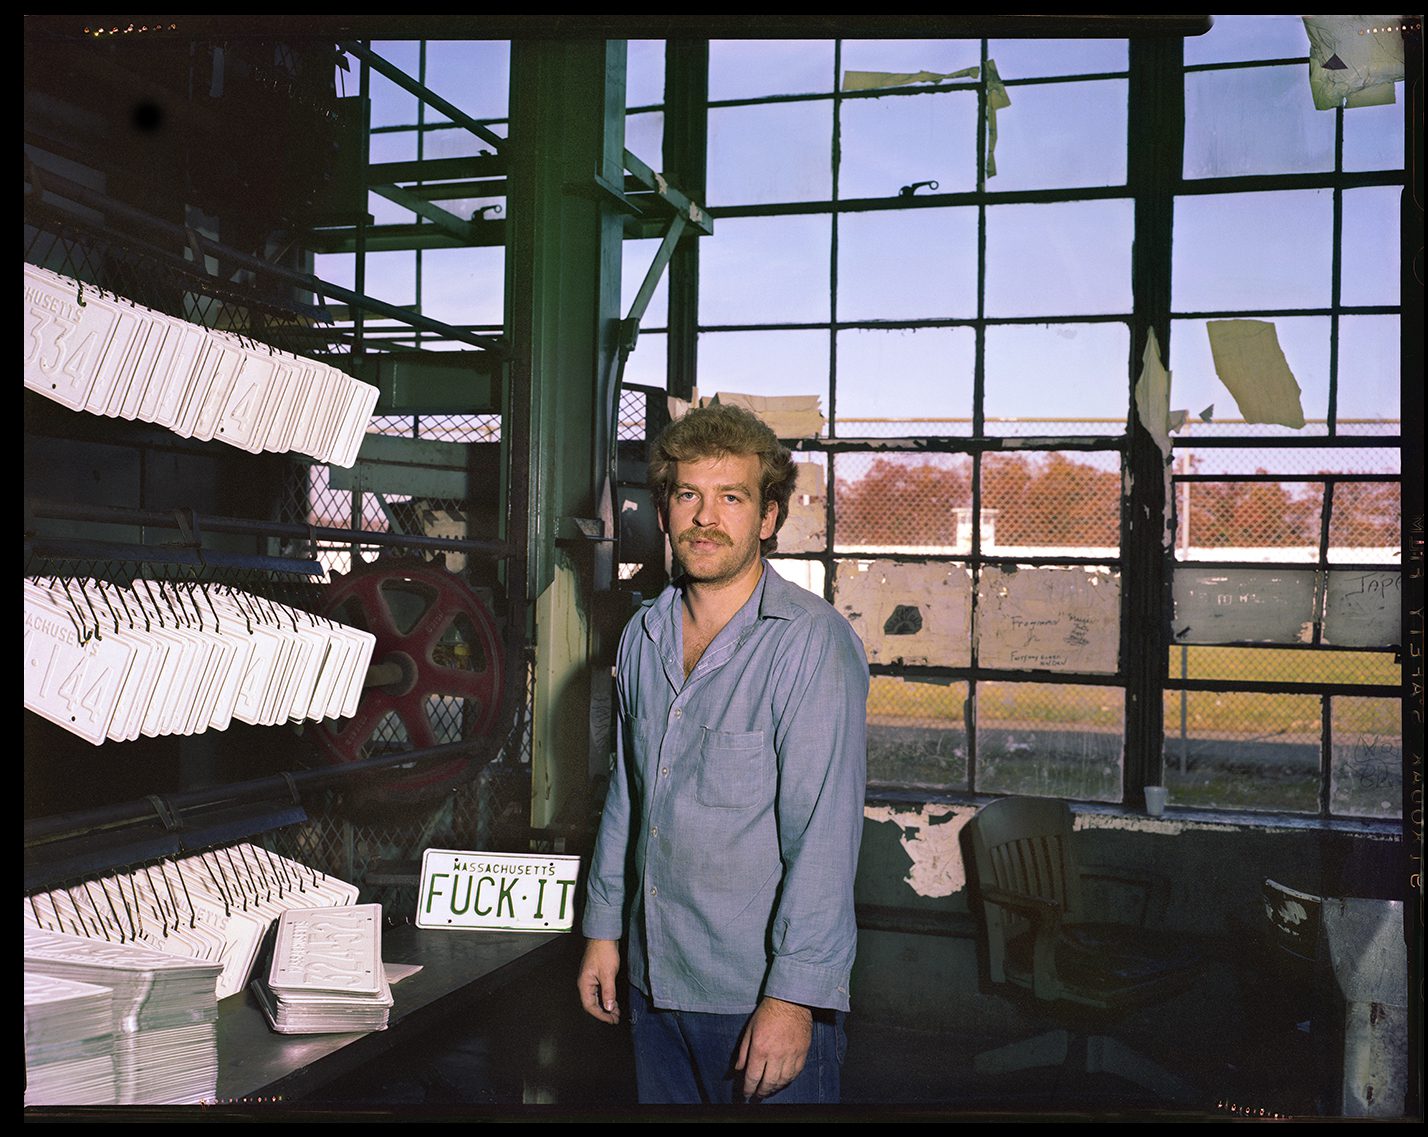 A man stands before a large window, and machinery to make license plates. One plate reads, "FUCK-IT".